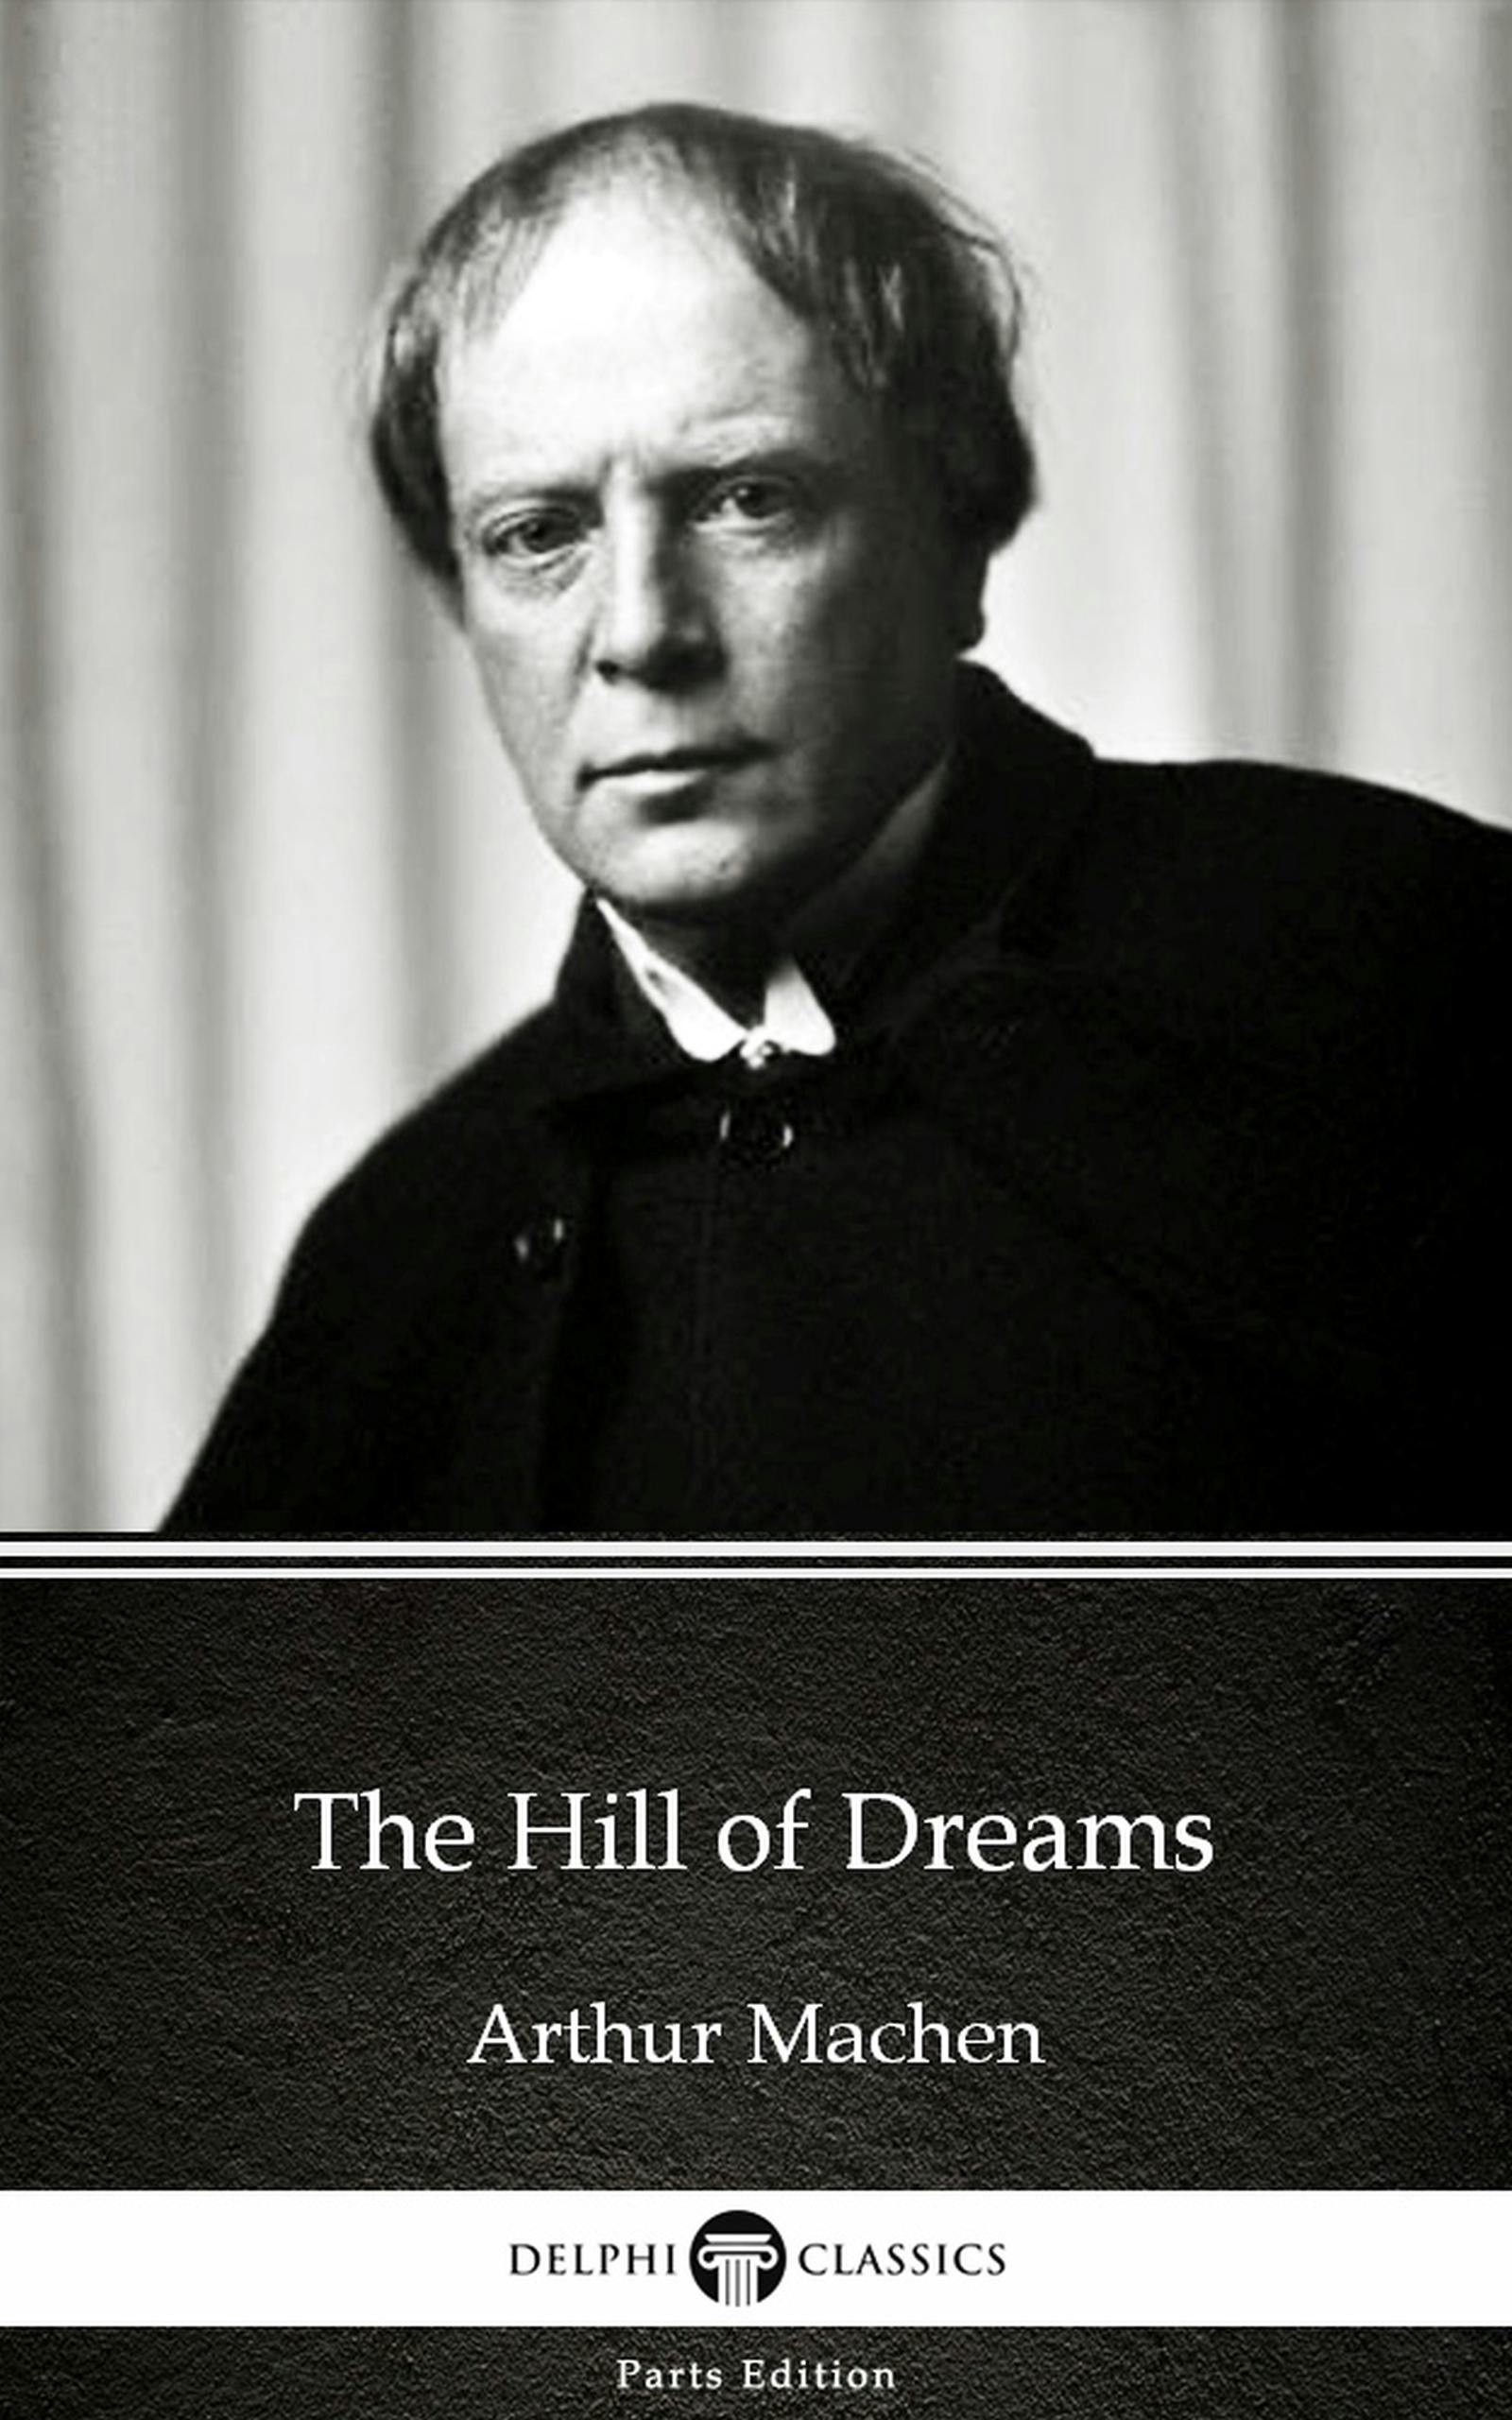 The Hill of Dreams by Arthur Machen - Delphi Classics (Illustrated) - undefined